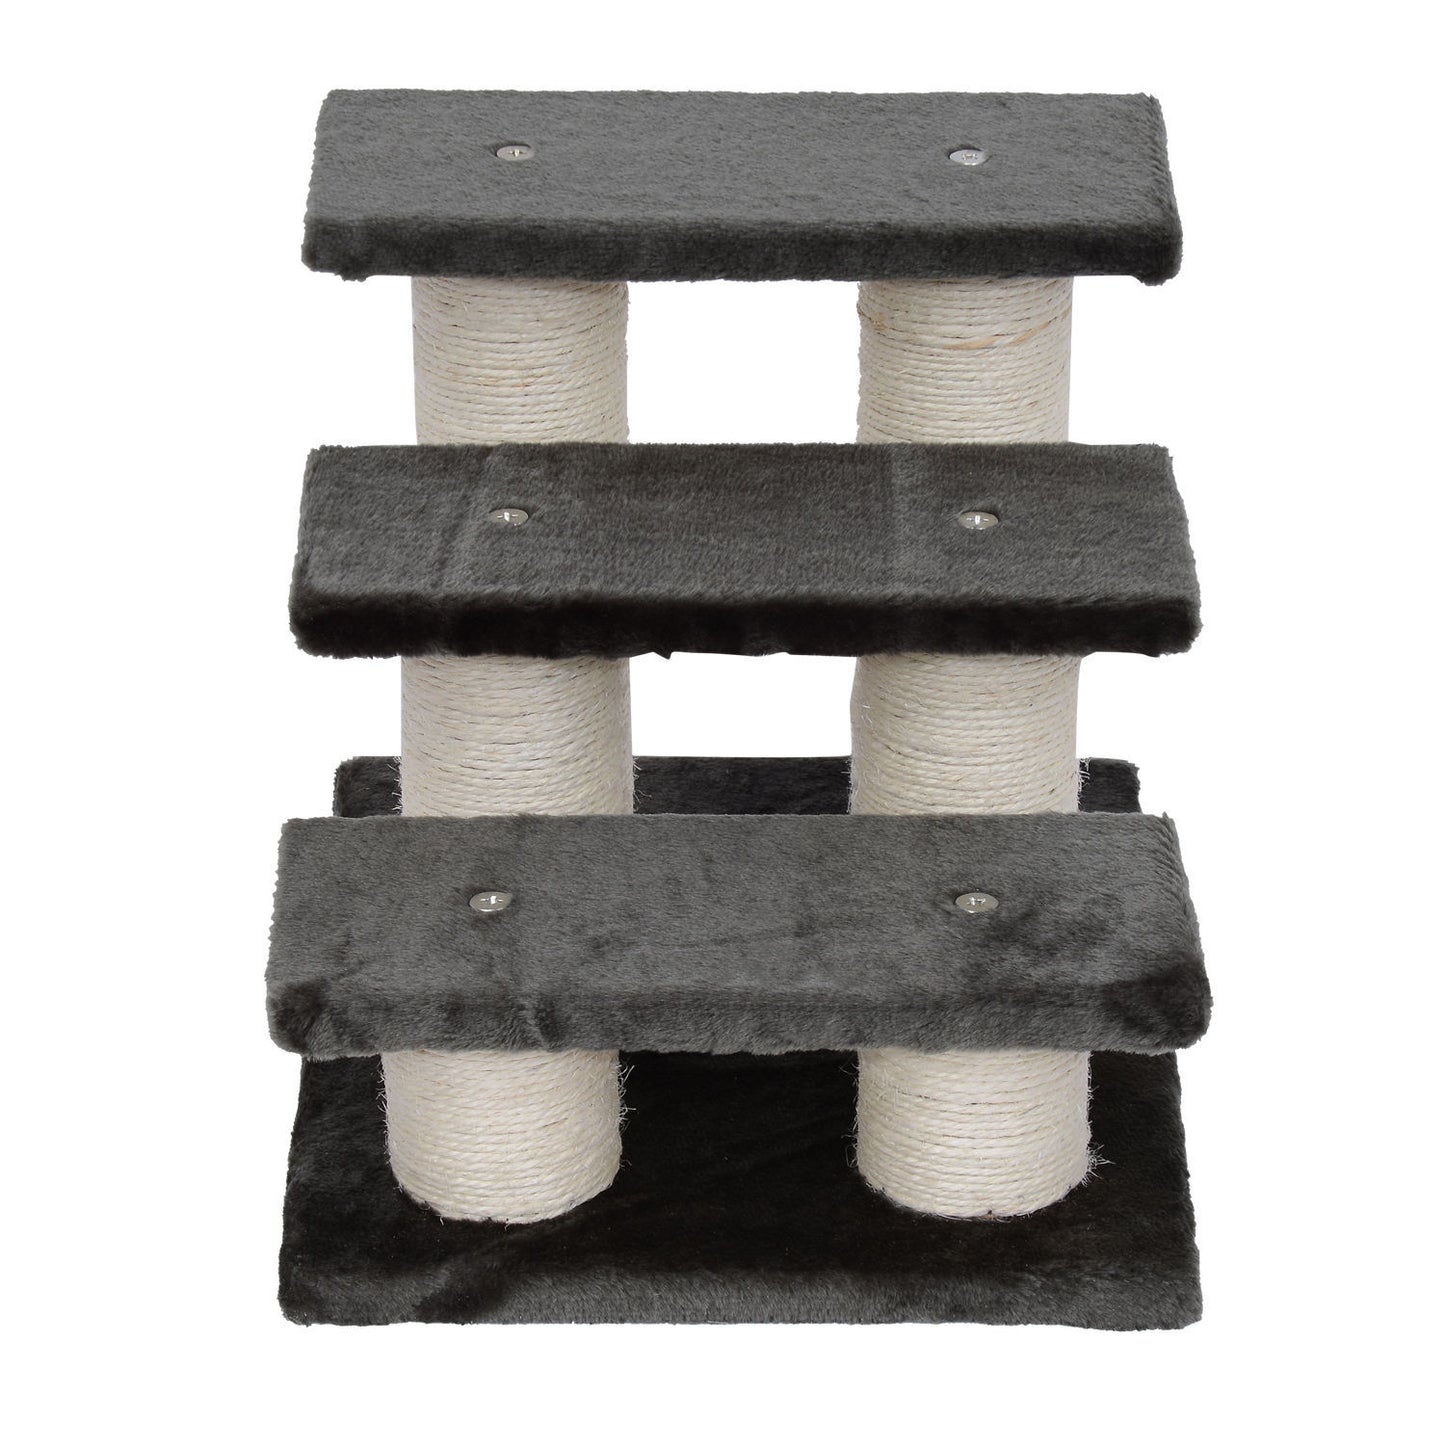 Nancy's Wilcox Animal Stairs Cat Stairs 3 Steps Dog Stairs Stairs for cats and dogs plush